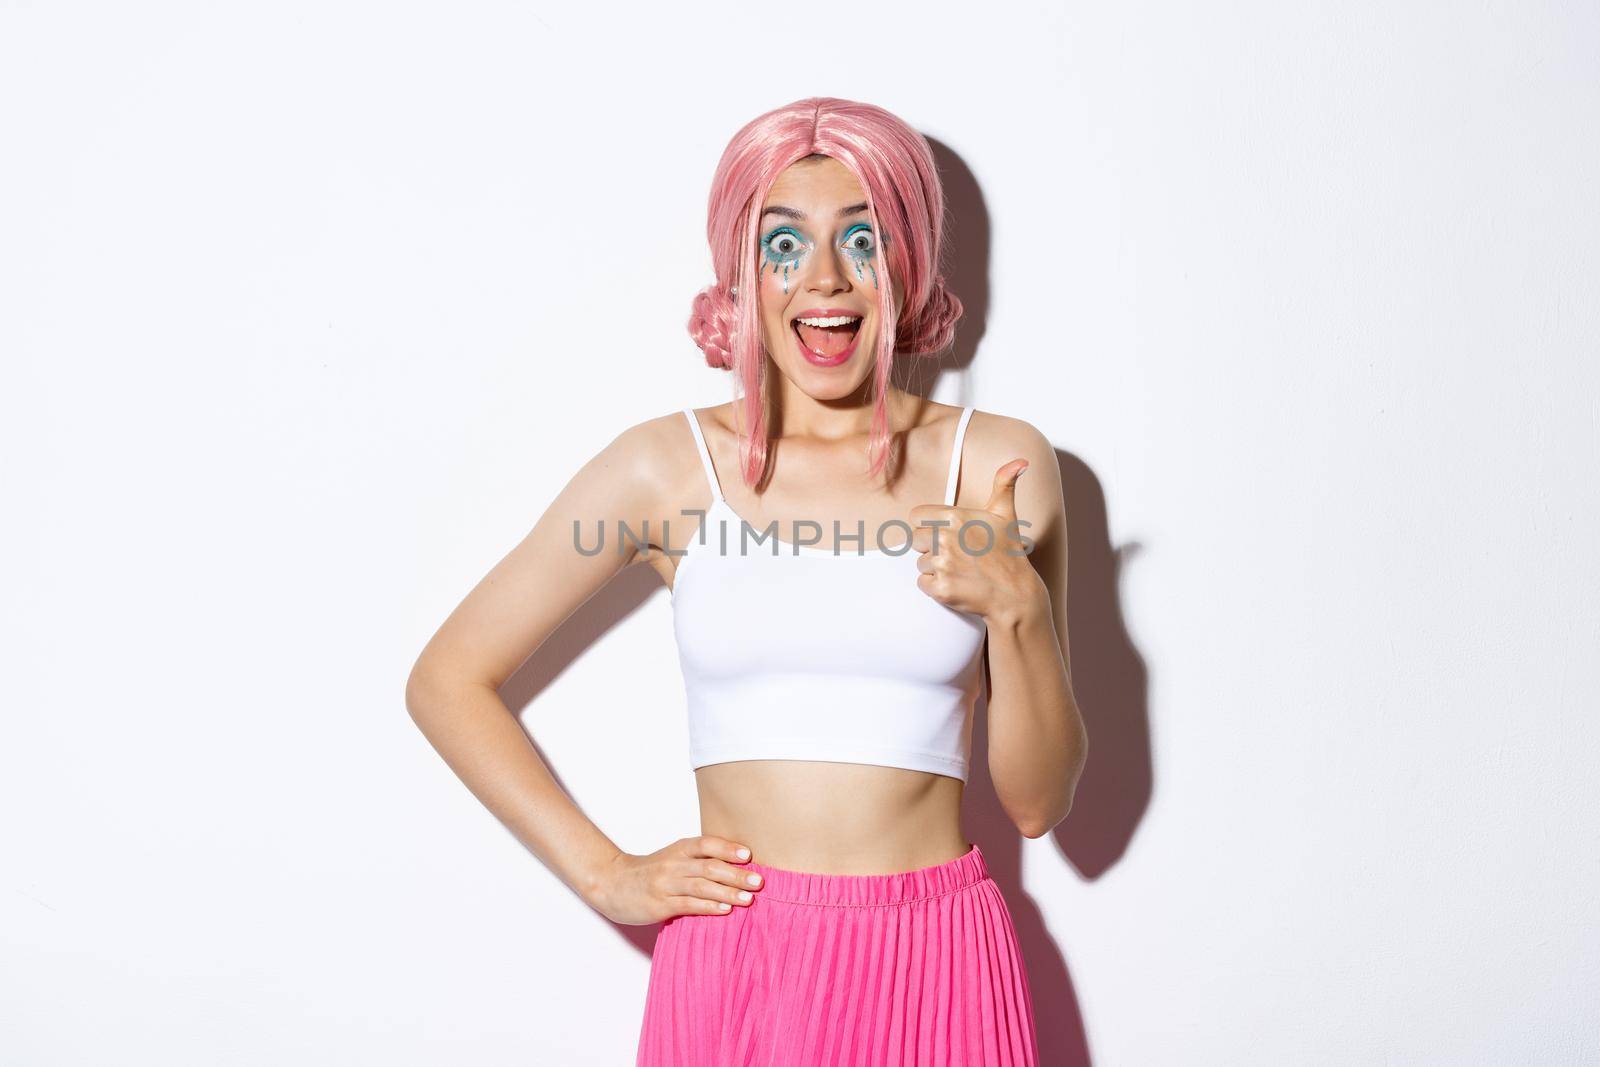 Portrait of enthusiastic attractive female model with pink hair and party makeup, showing thumbs-up in approval, smiling amazed, standing over white background in outfit for halloween.